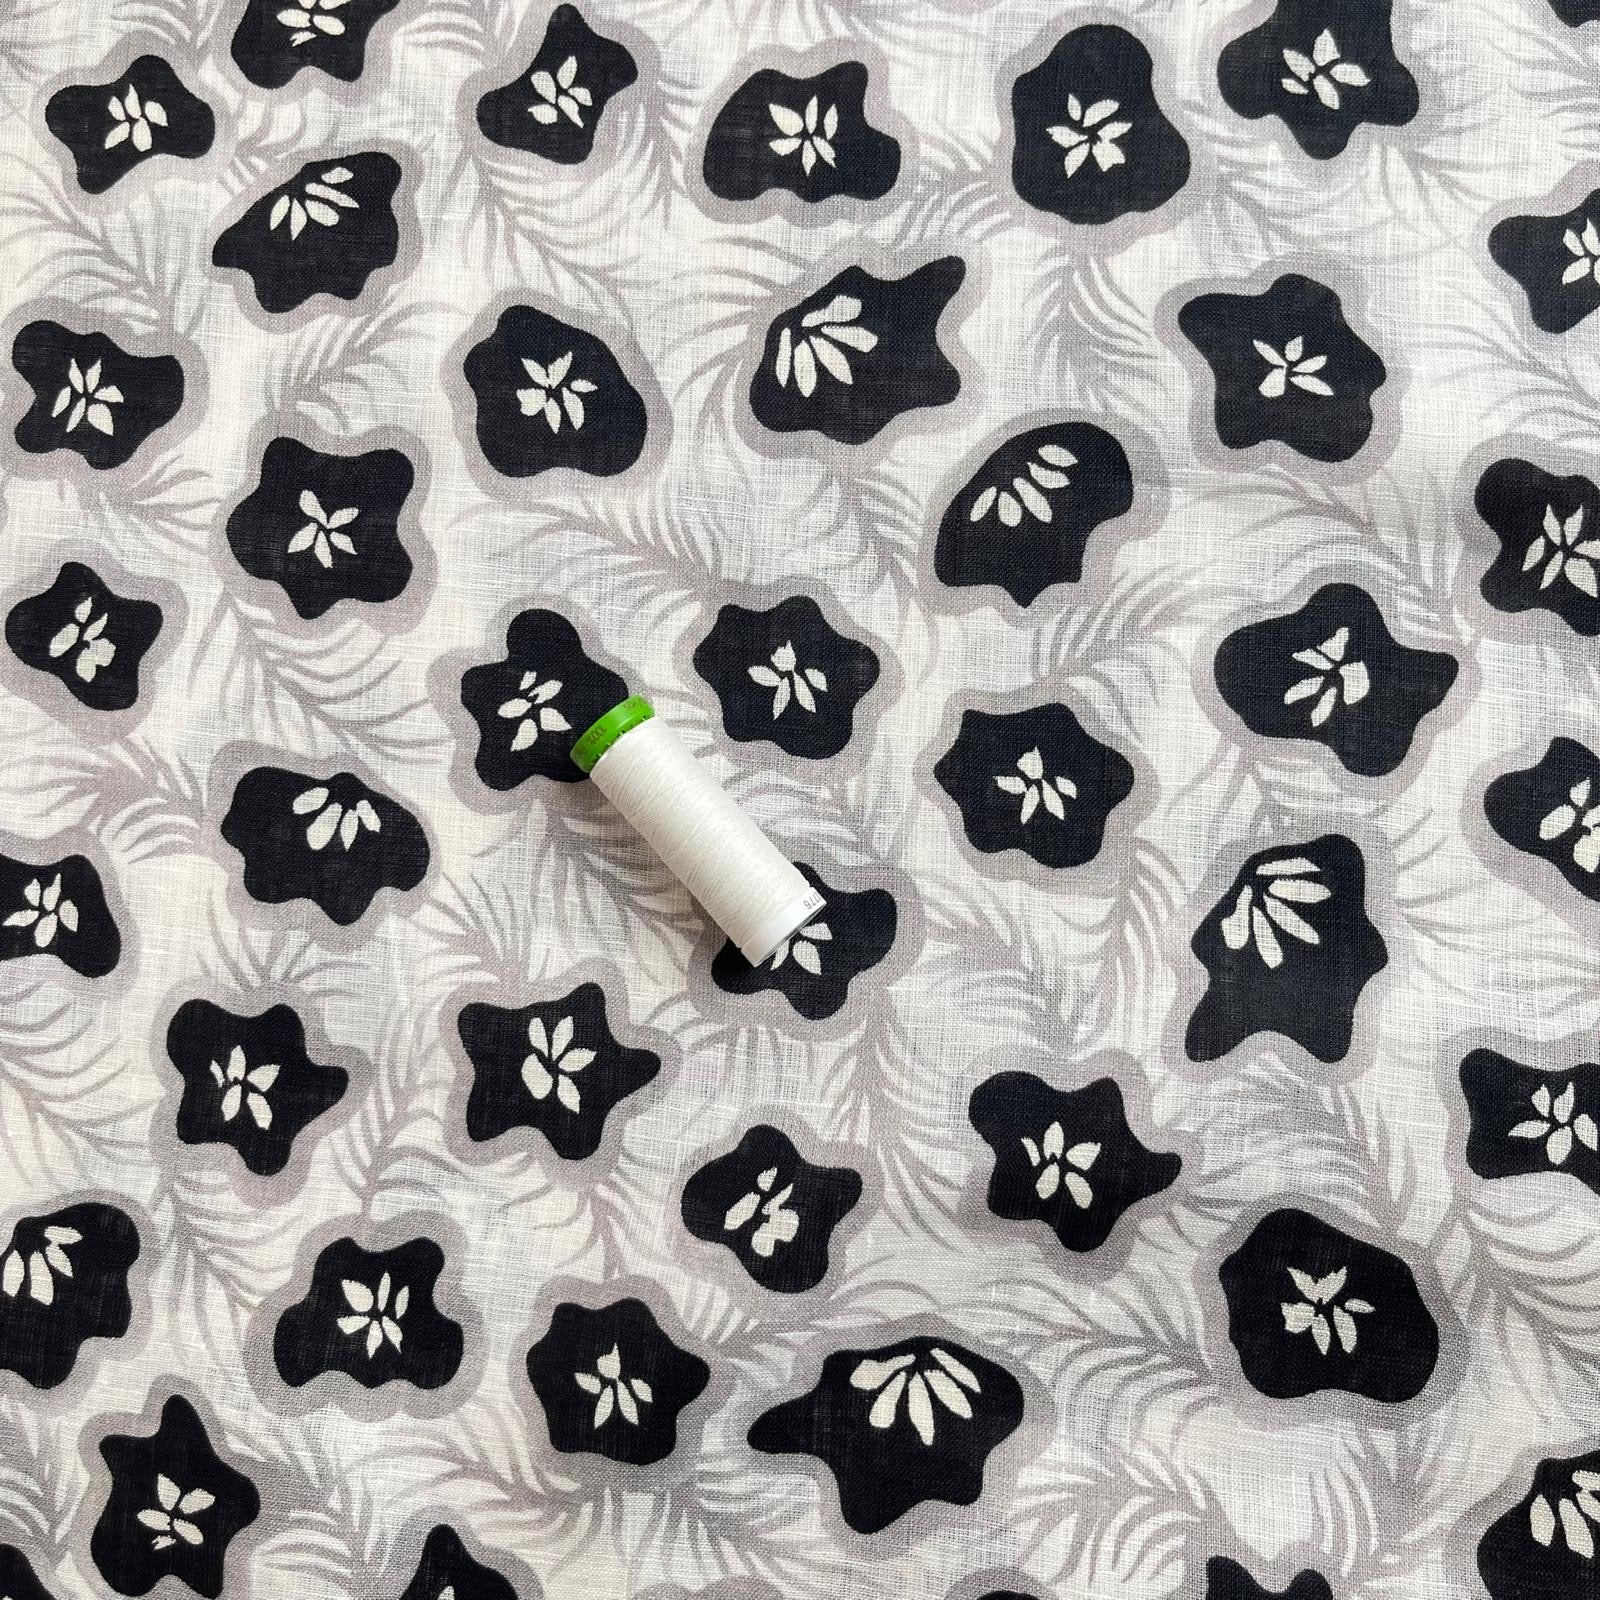 REMNANT 0.39 Metres - Ex-Designer Deadstock Tropical Fruits in Monochrome Pure Linen Fabric